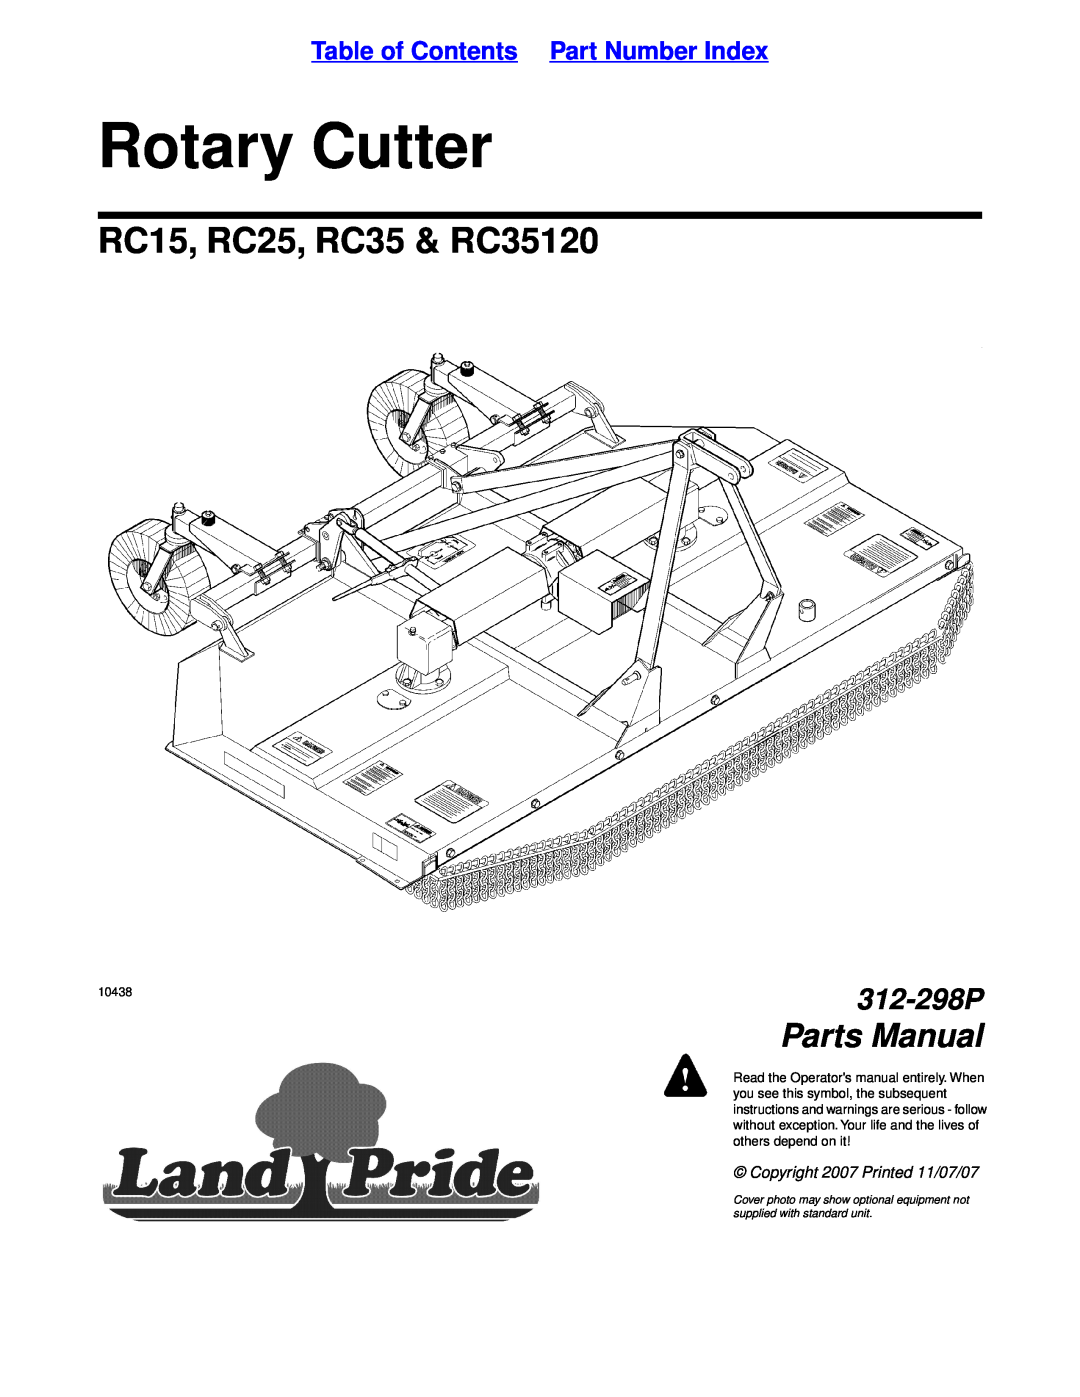 Land Pride manual Table of Contents Part Number Index, Rotary Cutter, RC15, RC25, RC35 & RC35120, Parts Manual 